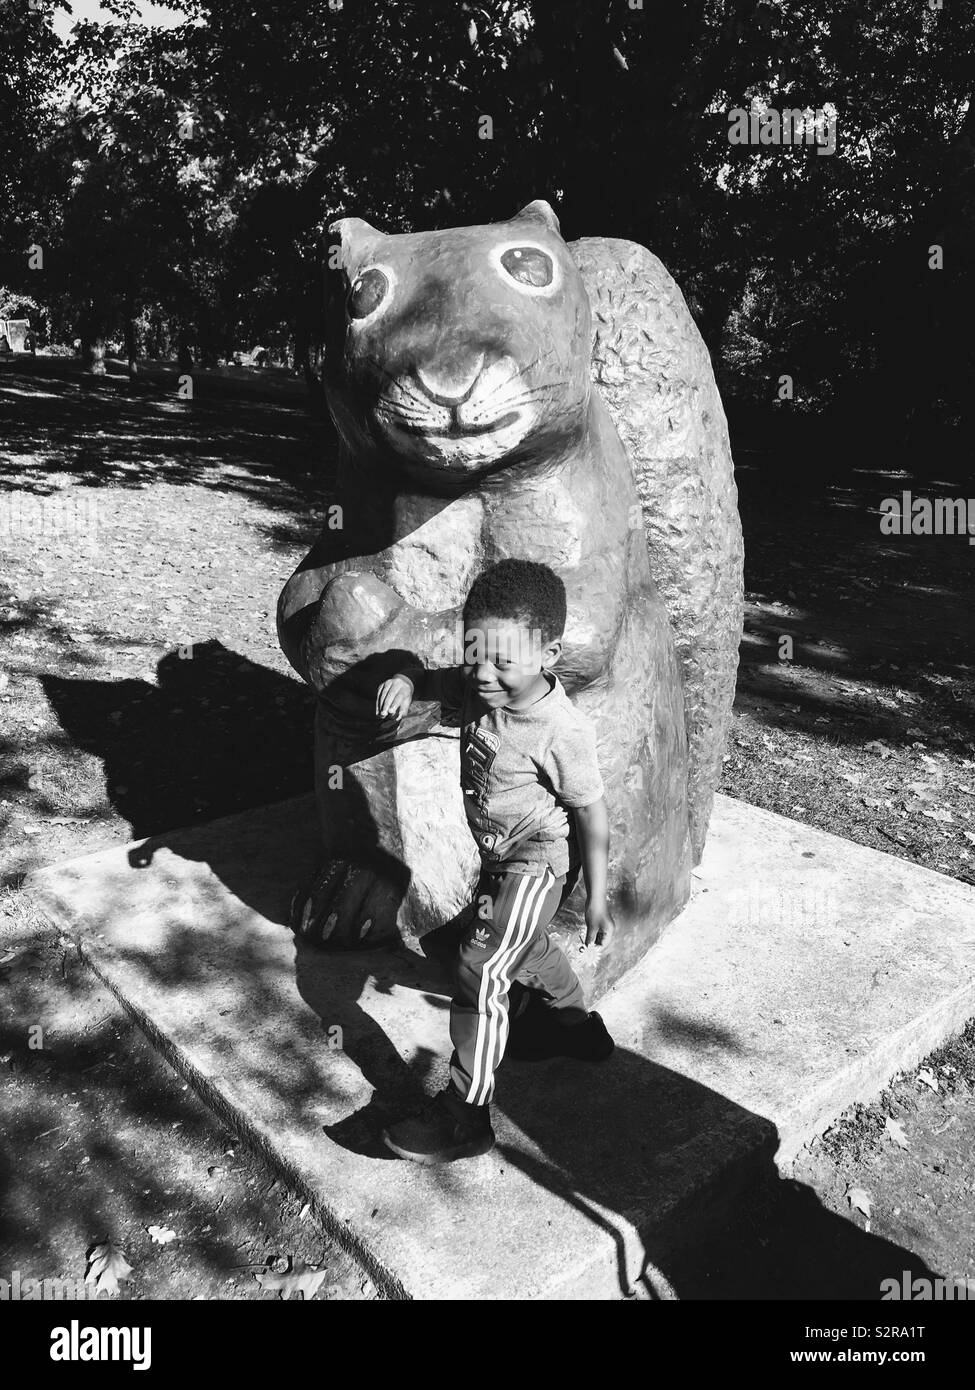 Child In Black And White Standing Next To Big Squirrel Stock Photo